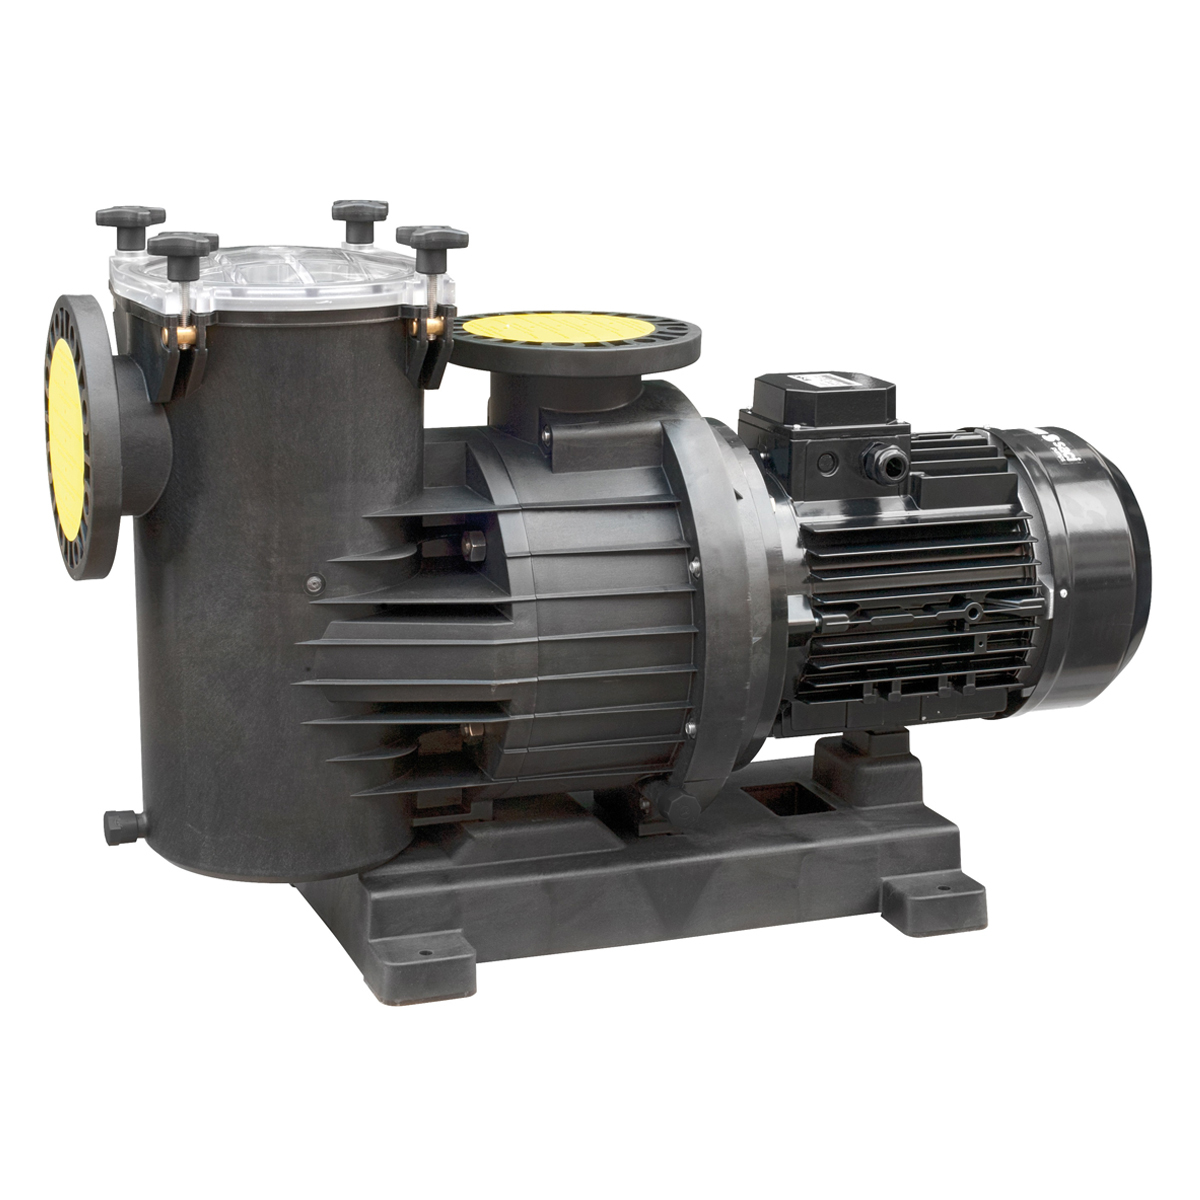 Smart Power Filter Pump 300 230-400V, 1450 rpm, 2,2 kW, 3 HP, 43 m3/h at 10m Smart Power Filter Pump 300 230-400V, 1450 rpm, 2,2 kW, 3 HP, 43 m3/h at 10m